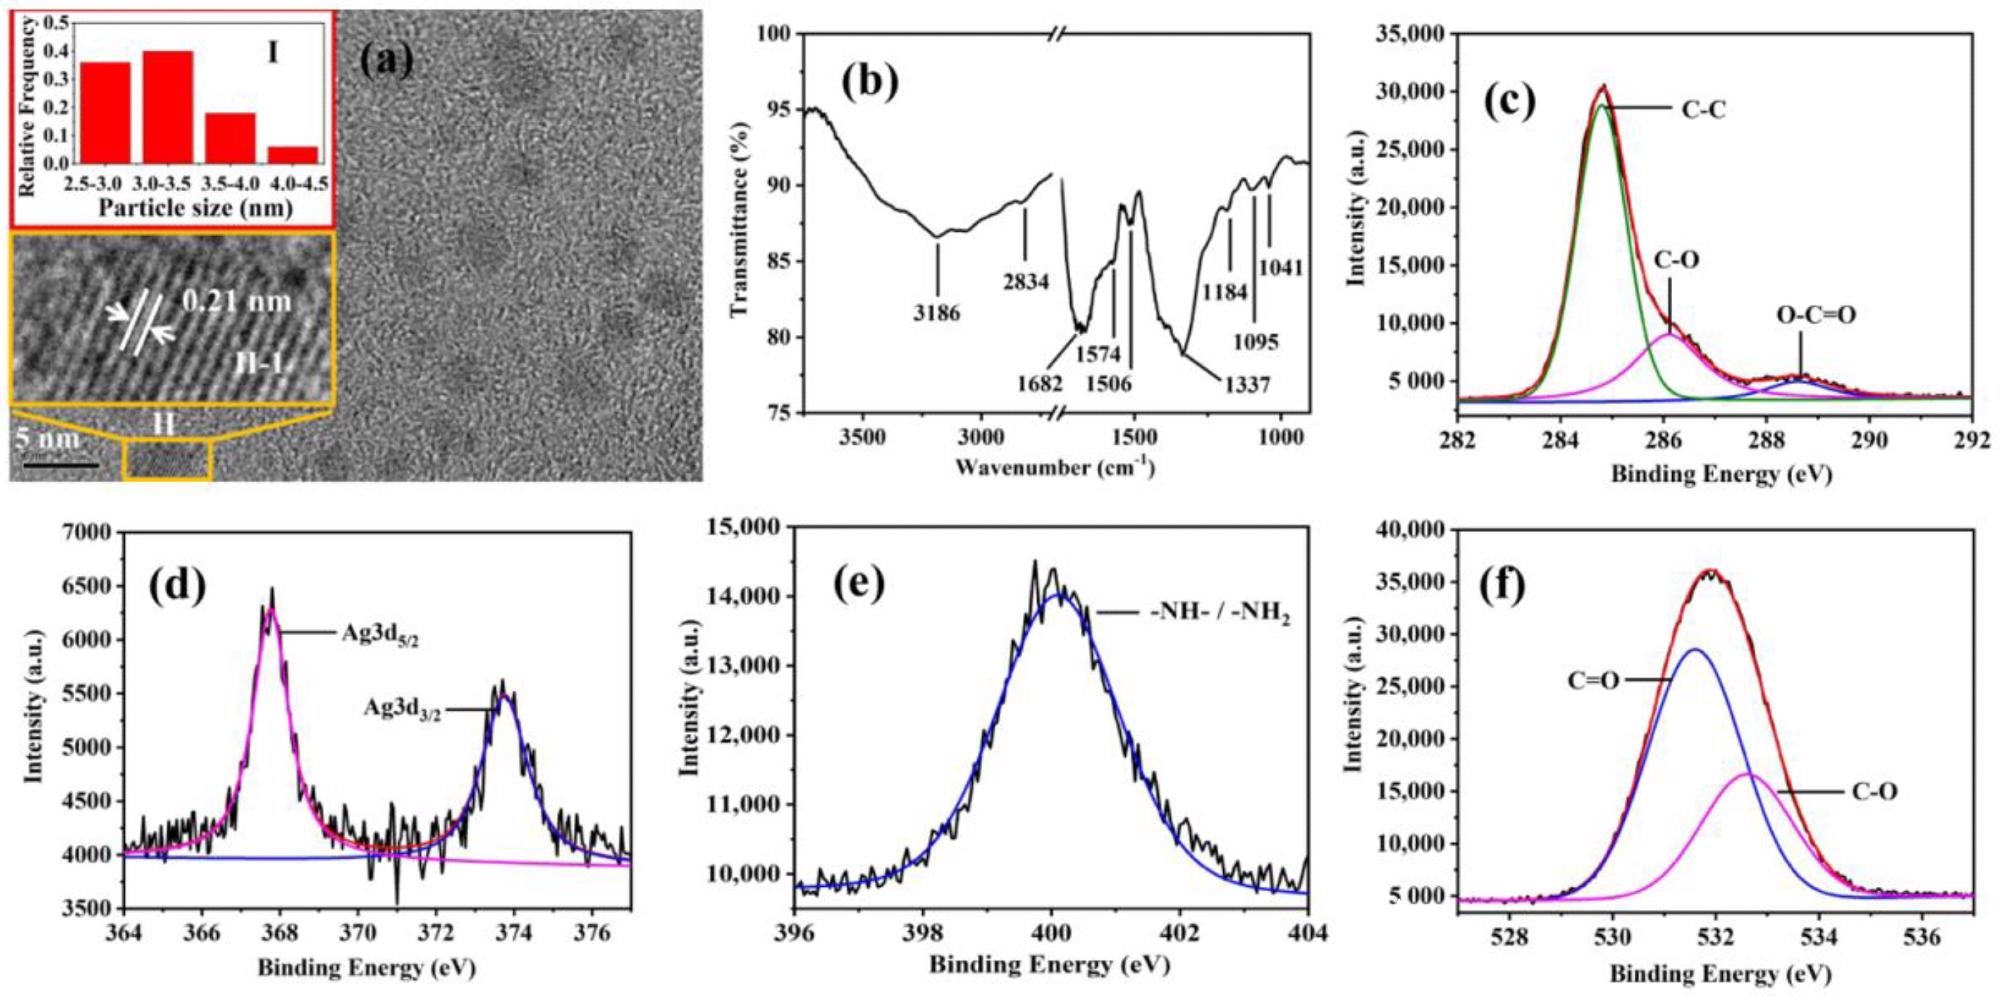 (a) TEM image of Ag-CDs. (Inserts: (I) Particle size distribution histogram of Ag-CDs. (II-1) Magnified image of ”II” Ag-CD.) FT-IR spectrum (b), high-resolution XPS spectra of C1s (c), Ag3d (d), N1s (e), and O1s (f), respectively, of Ag-CDs.